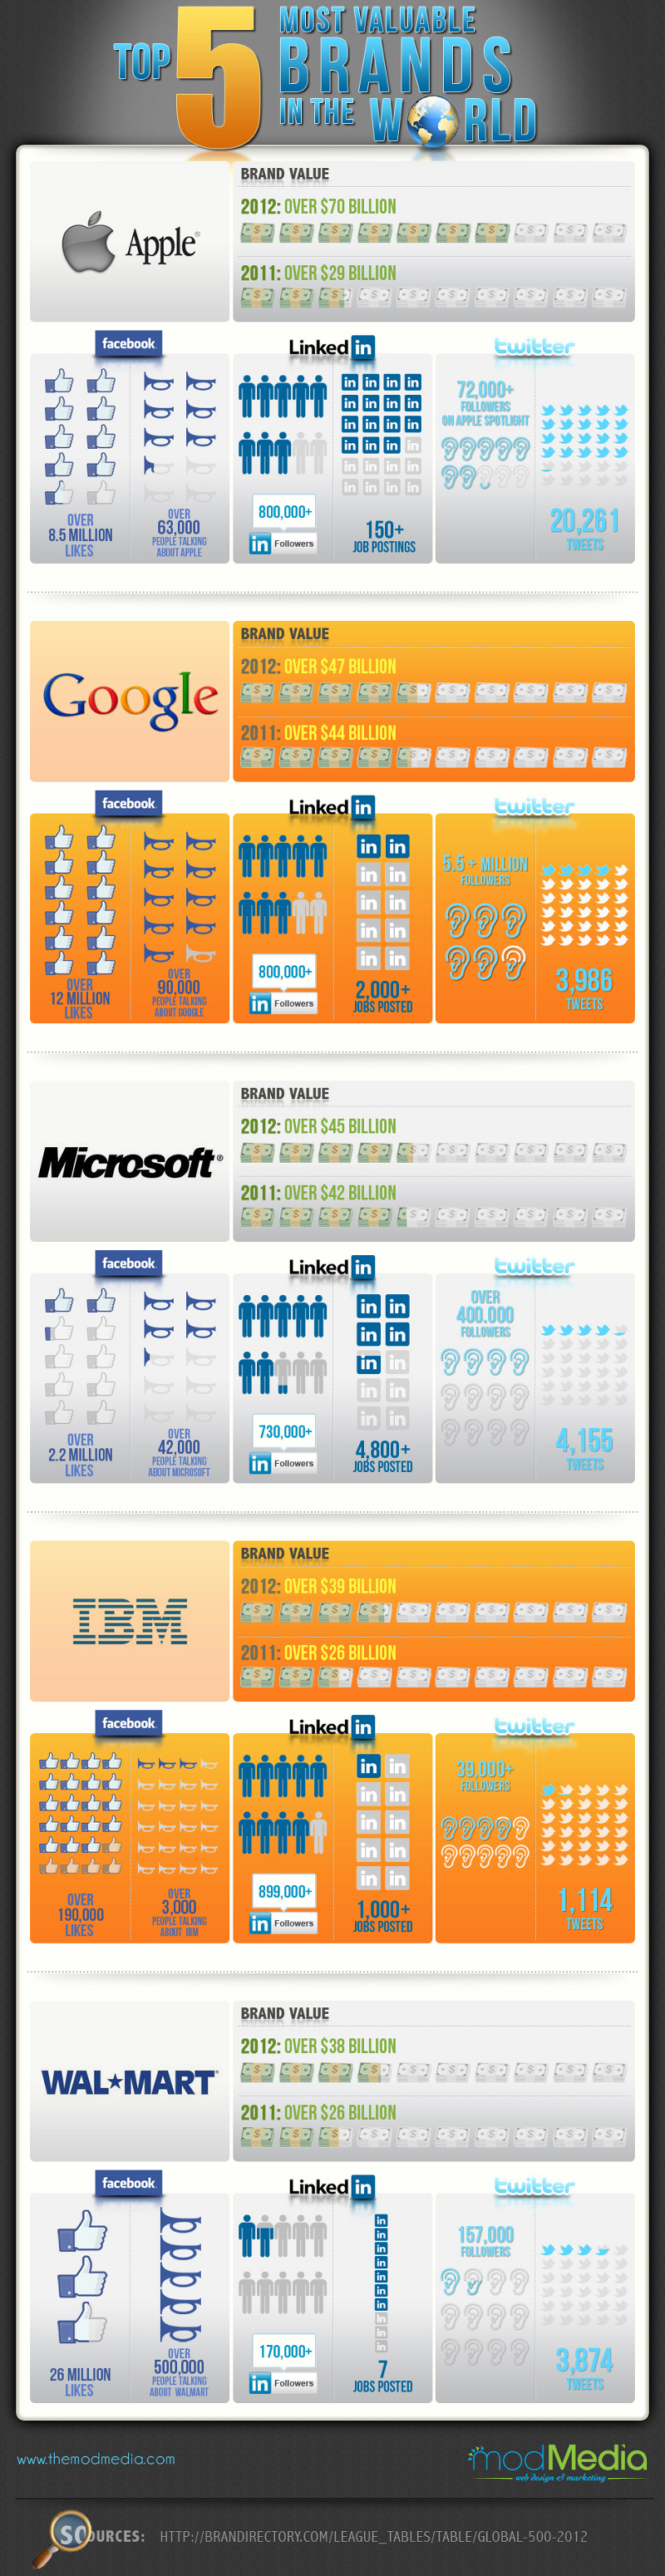 List of the Most Valuable Brands in the World for 2012-2013